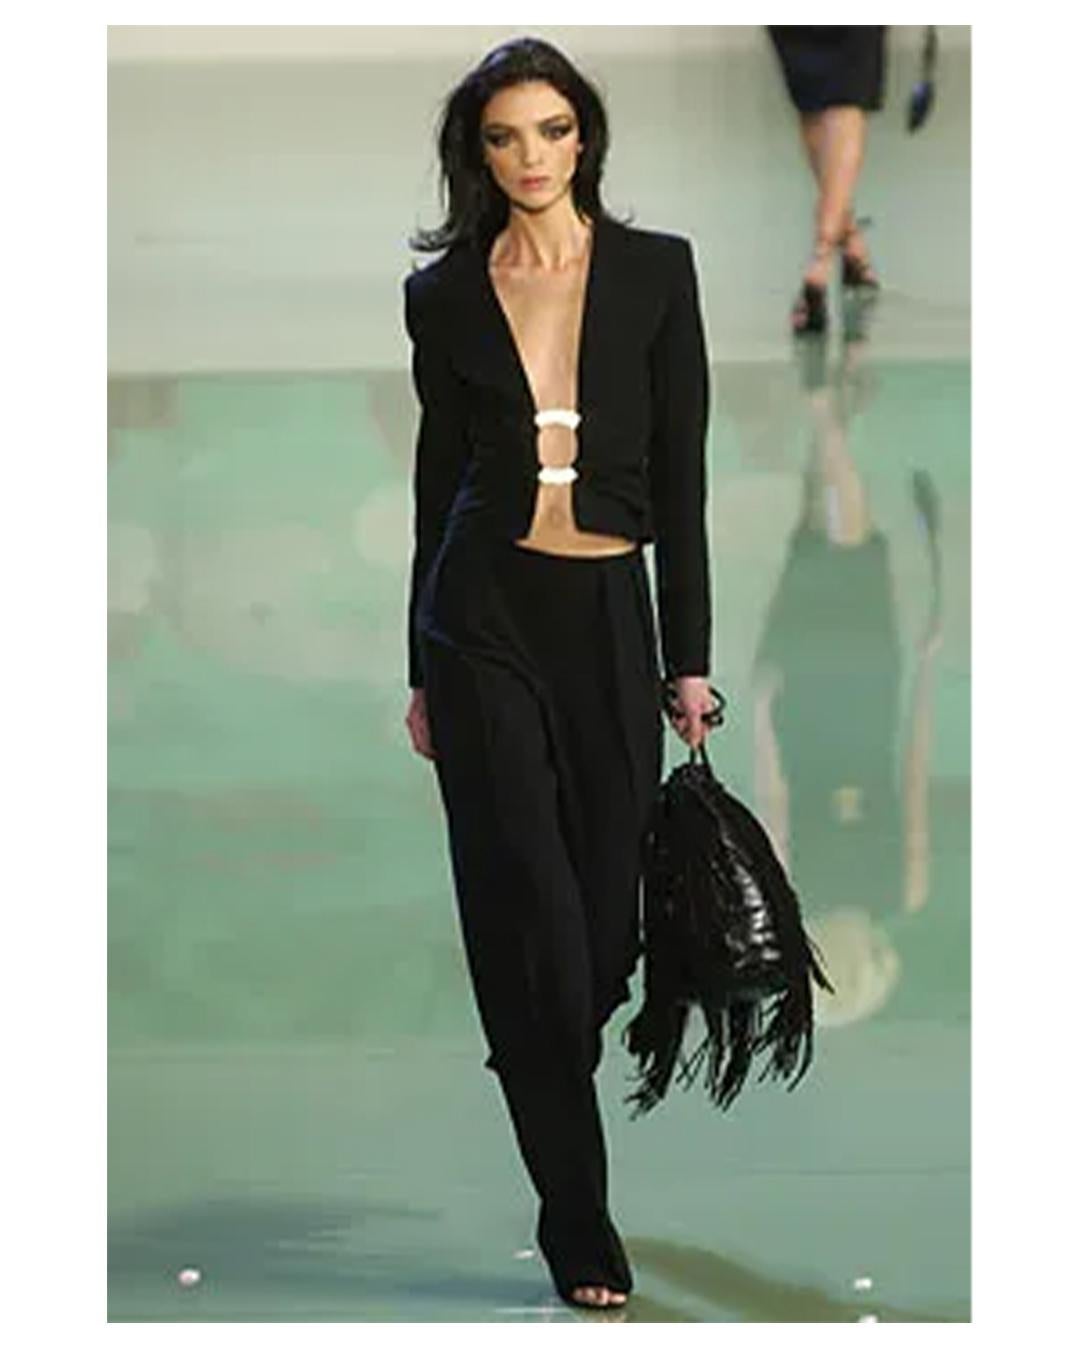 LOVE LALI Vintage

Valentino Spring 2003
This is the most gorgeous head turning jacket! Incredibly sexy to team with dress pants
Collarless long sleeve black fitted jacket with an open plunging neckline
The jacket closes via an oversized brass